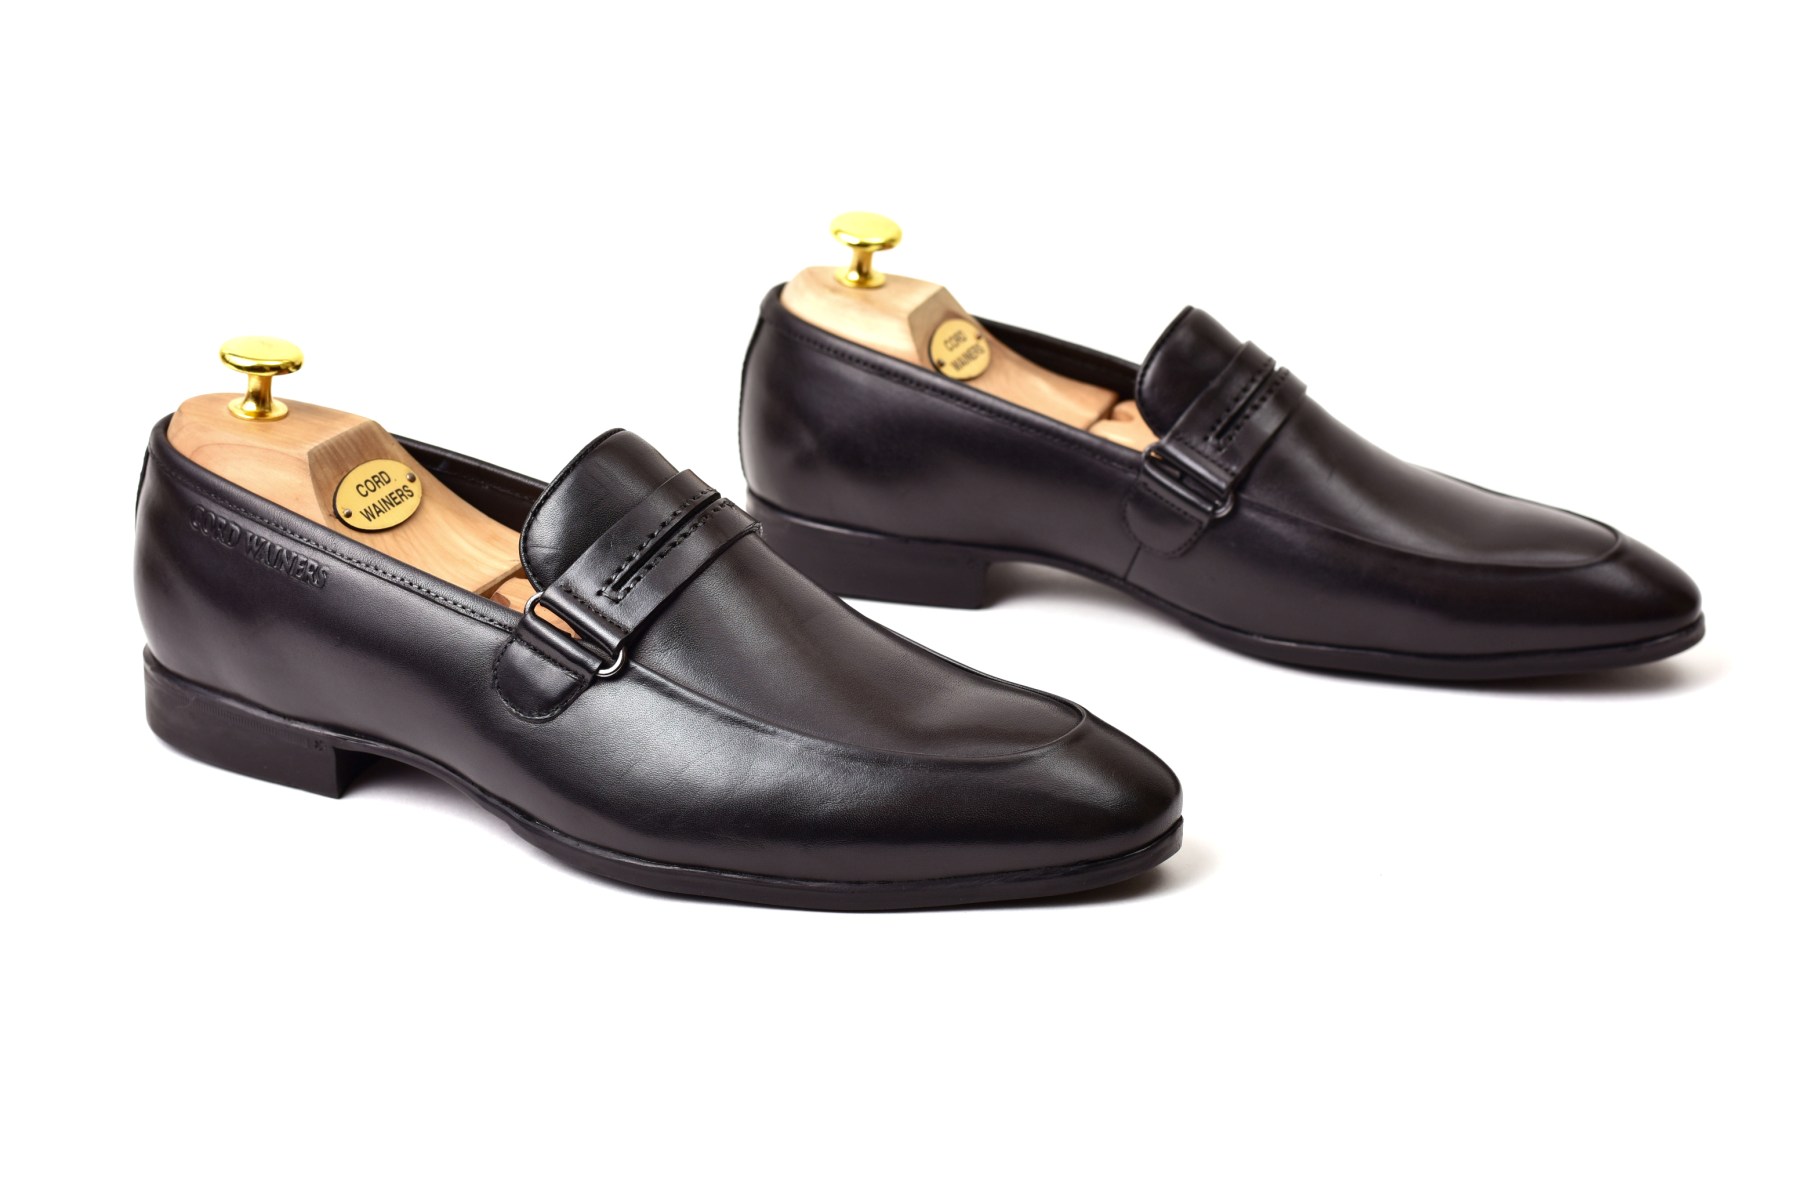 Parham Pro - Cordwainers - Cordwainers